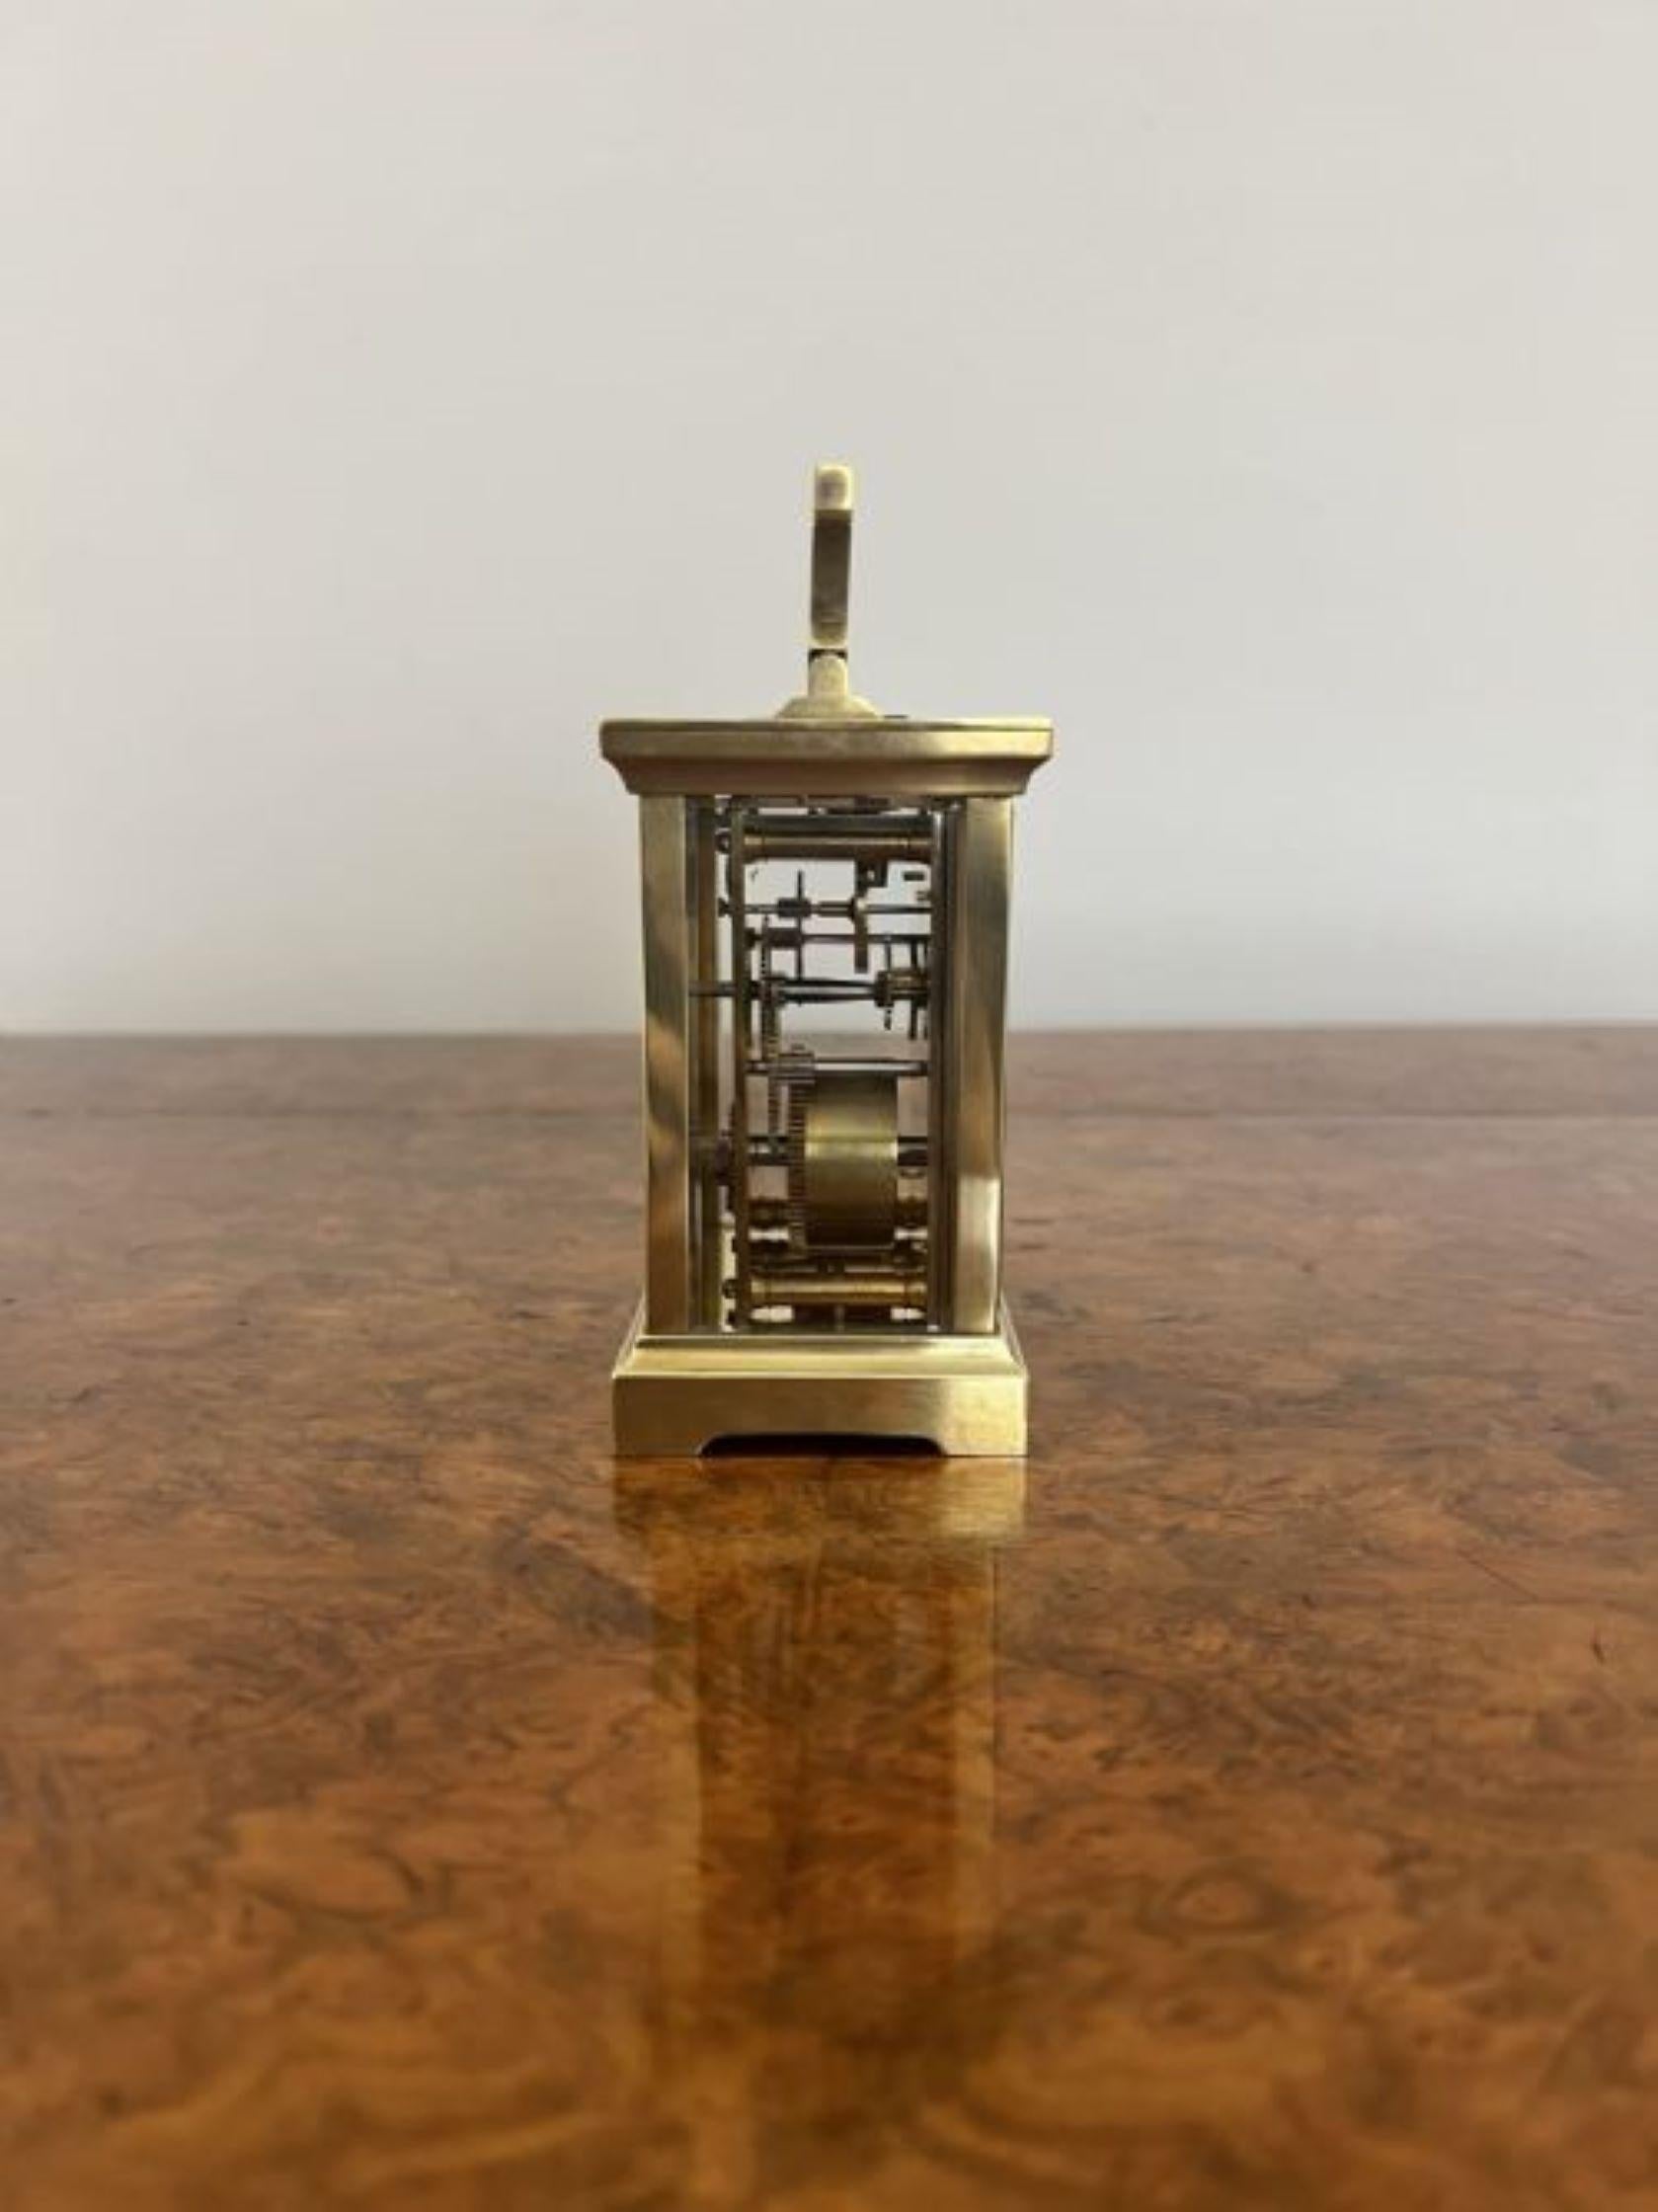 Quality antique brass carriage clock having a quality antique brass carriage clock a white enamel dial with original hands and key, eight day French movement and a handle to the top of the case. 
Please note all of our clocks are serviced prior to